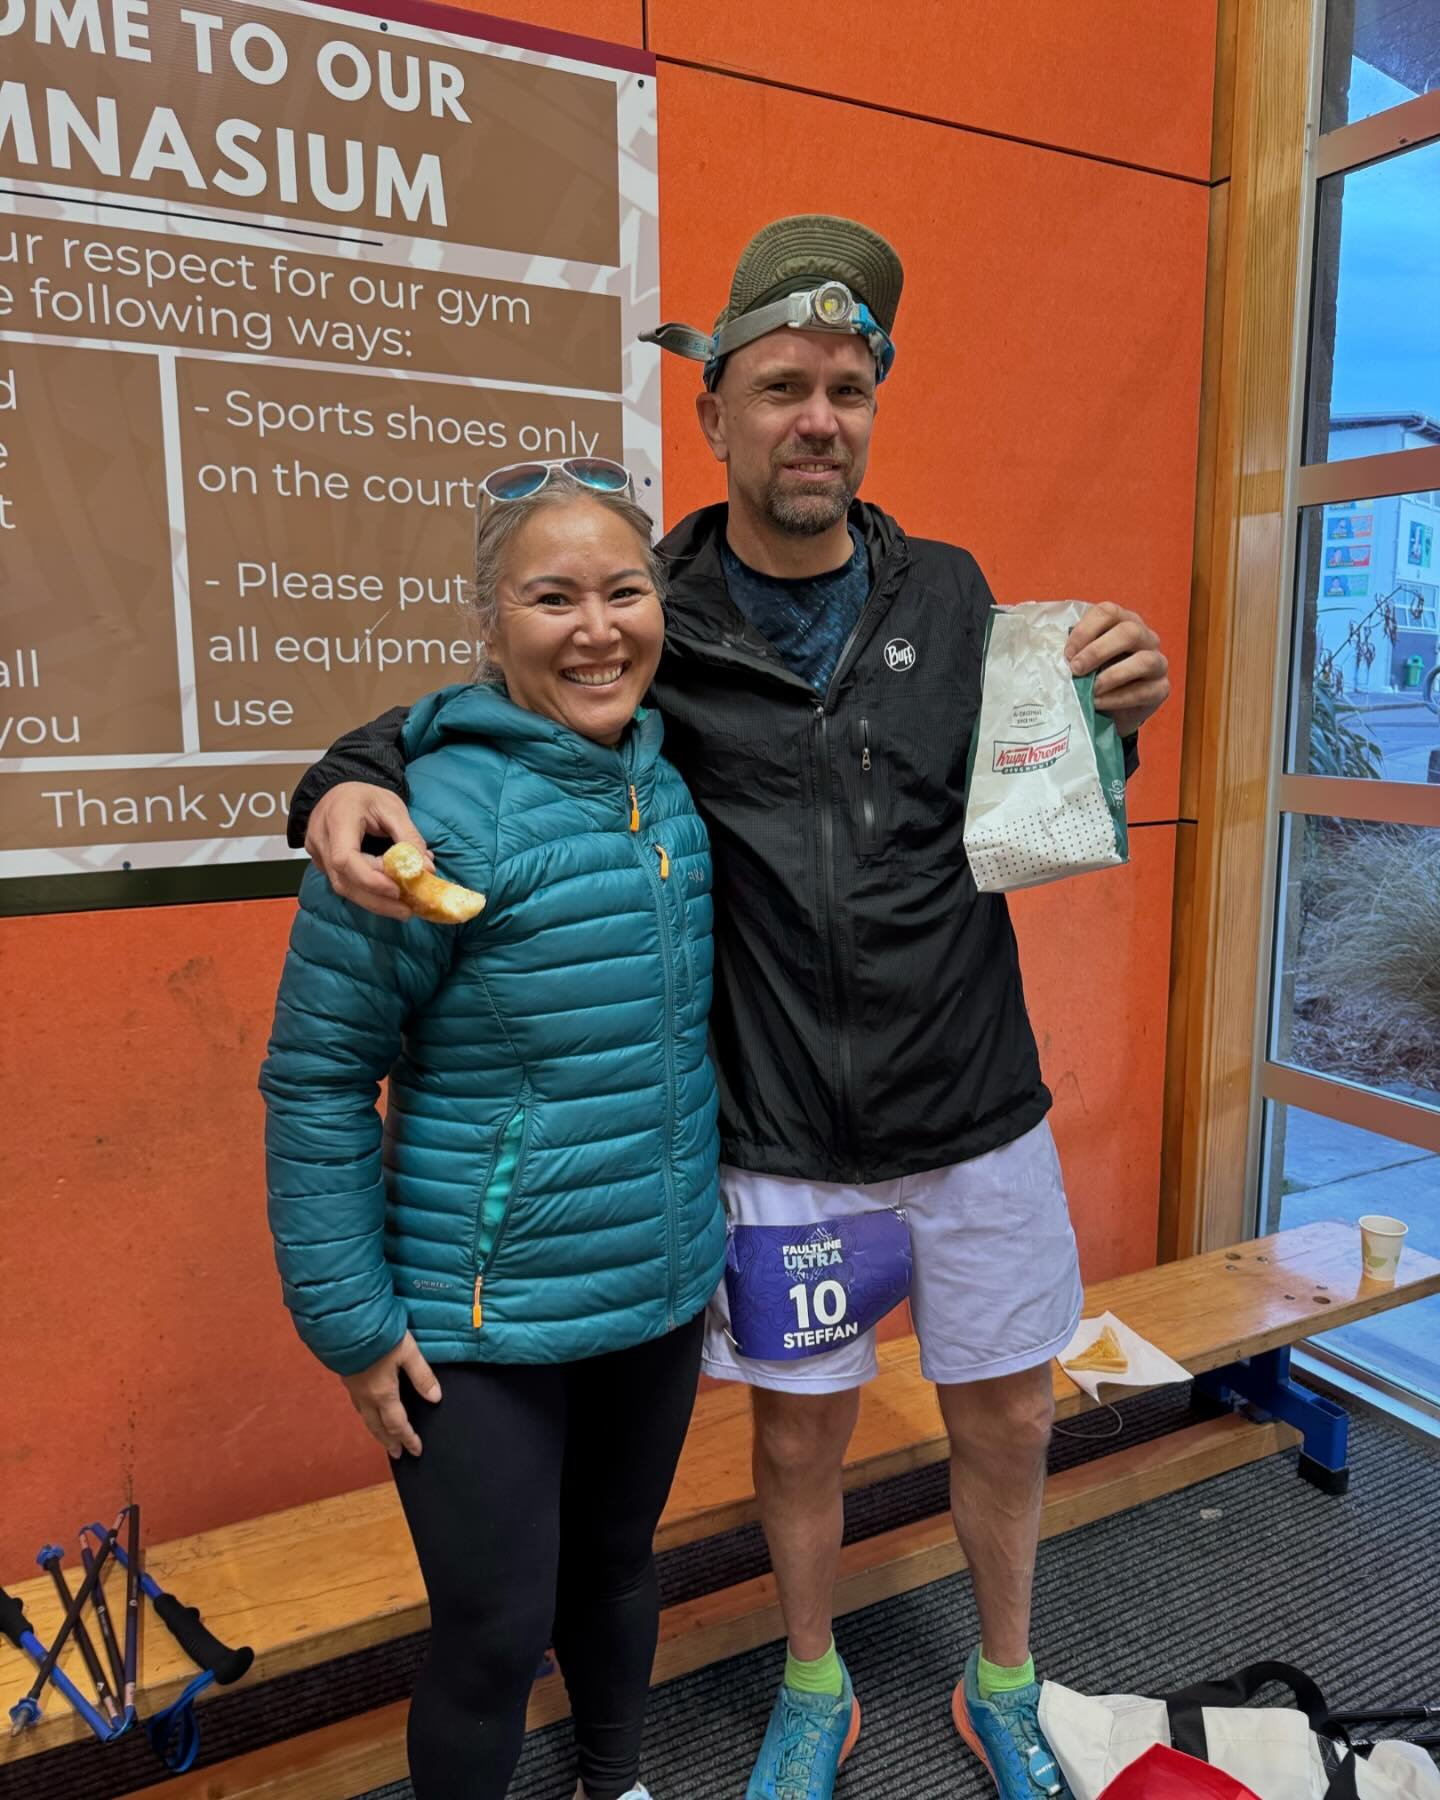 Steff at the 78km aid station looking good 🥰 took him donuts 🍩 amazing strong guy and super positive! Half way baby! #faultlineultra #gorunguys #100miles